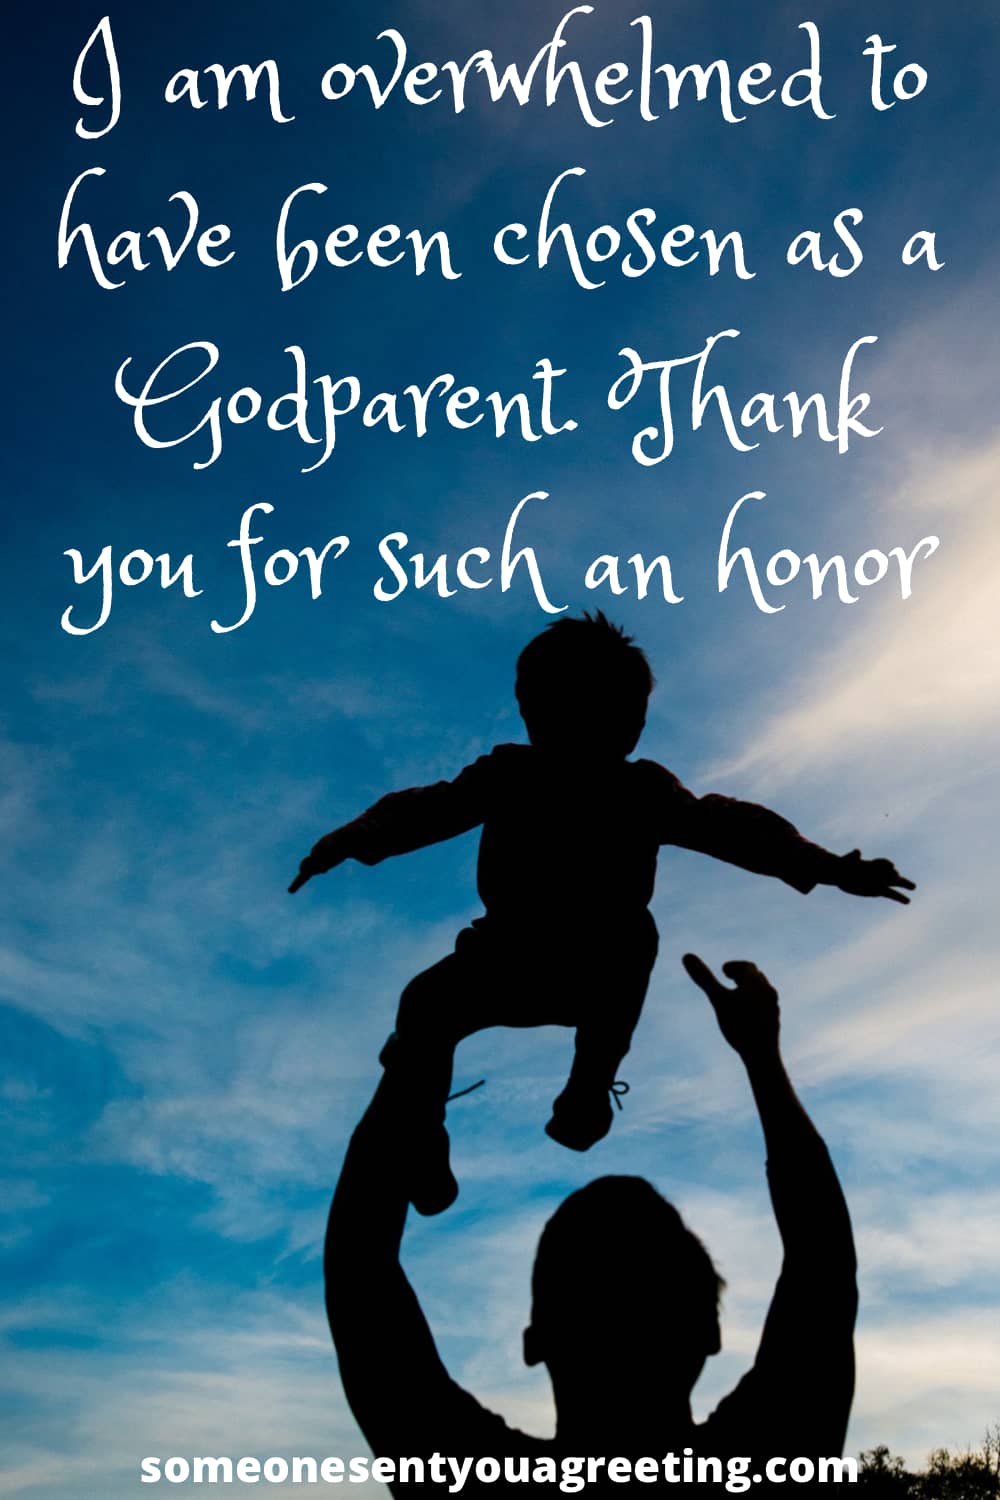 42 Honored to be Godparents Quotes - Someone Sent You A Greeting